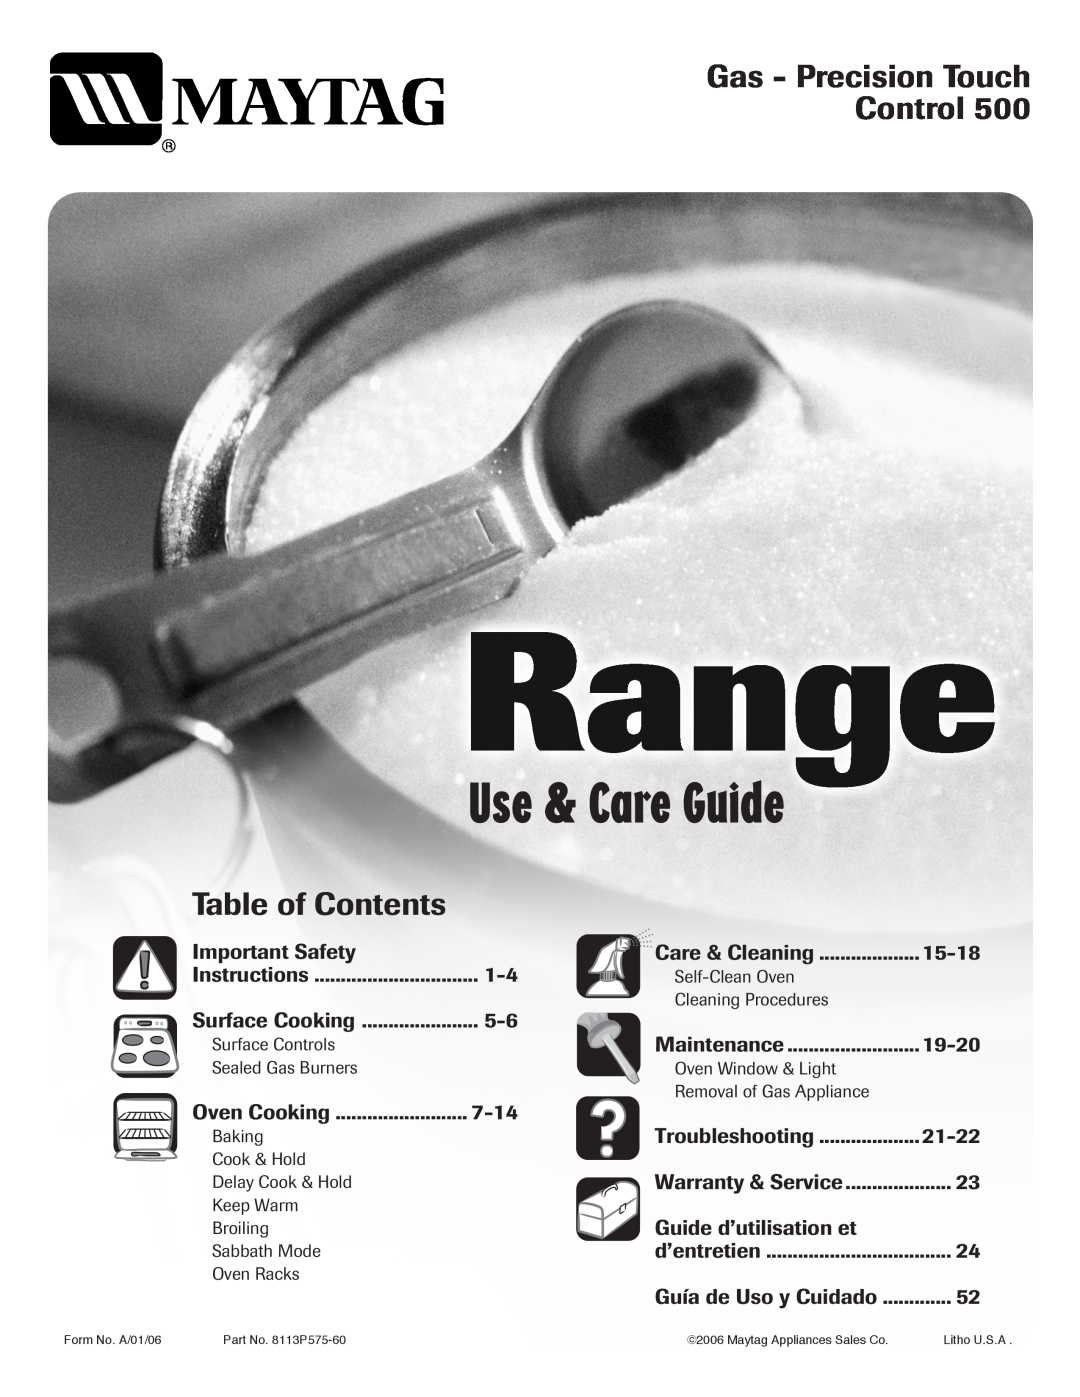 Maytag Gas - Precision Touch Control 500 Range important safety instructions Use & Care Guide, Table of Contents 